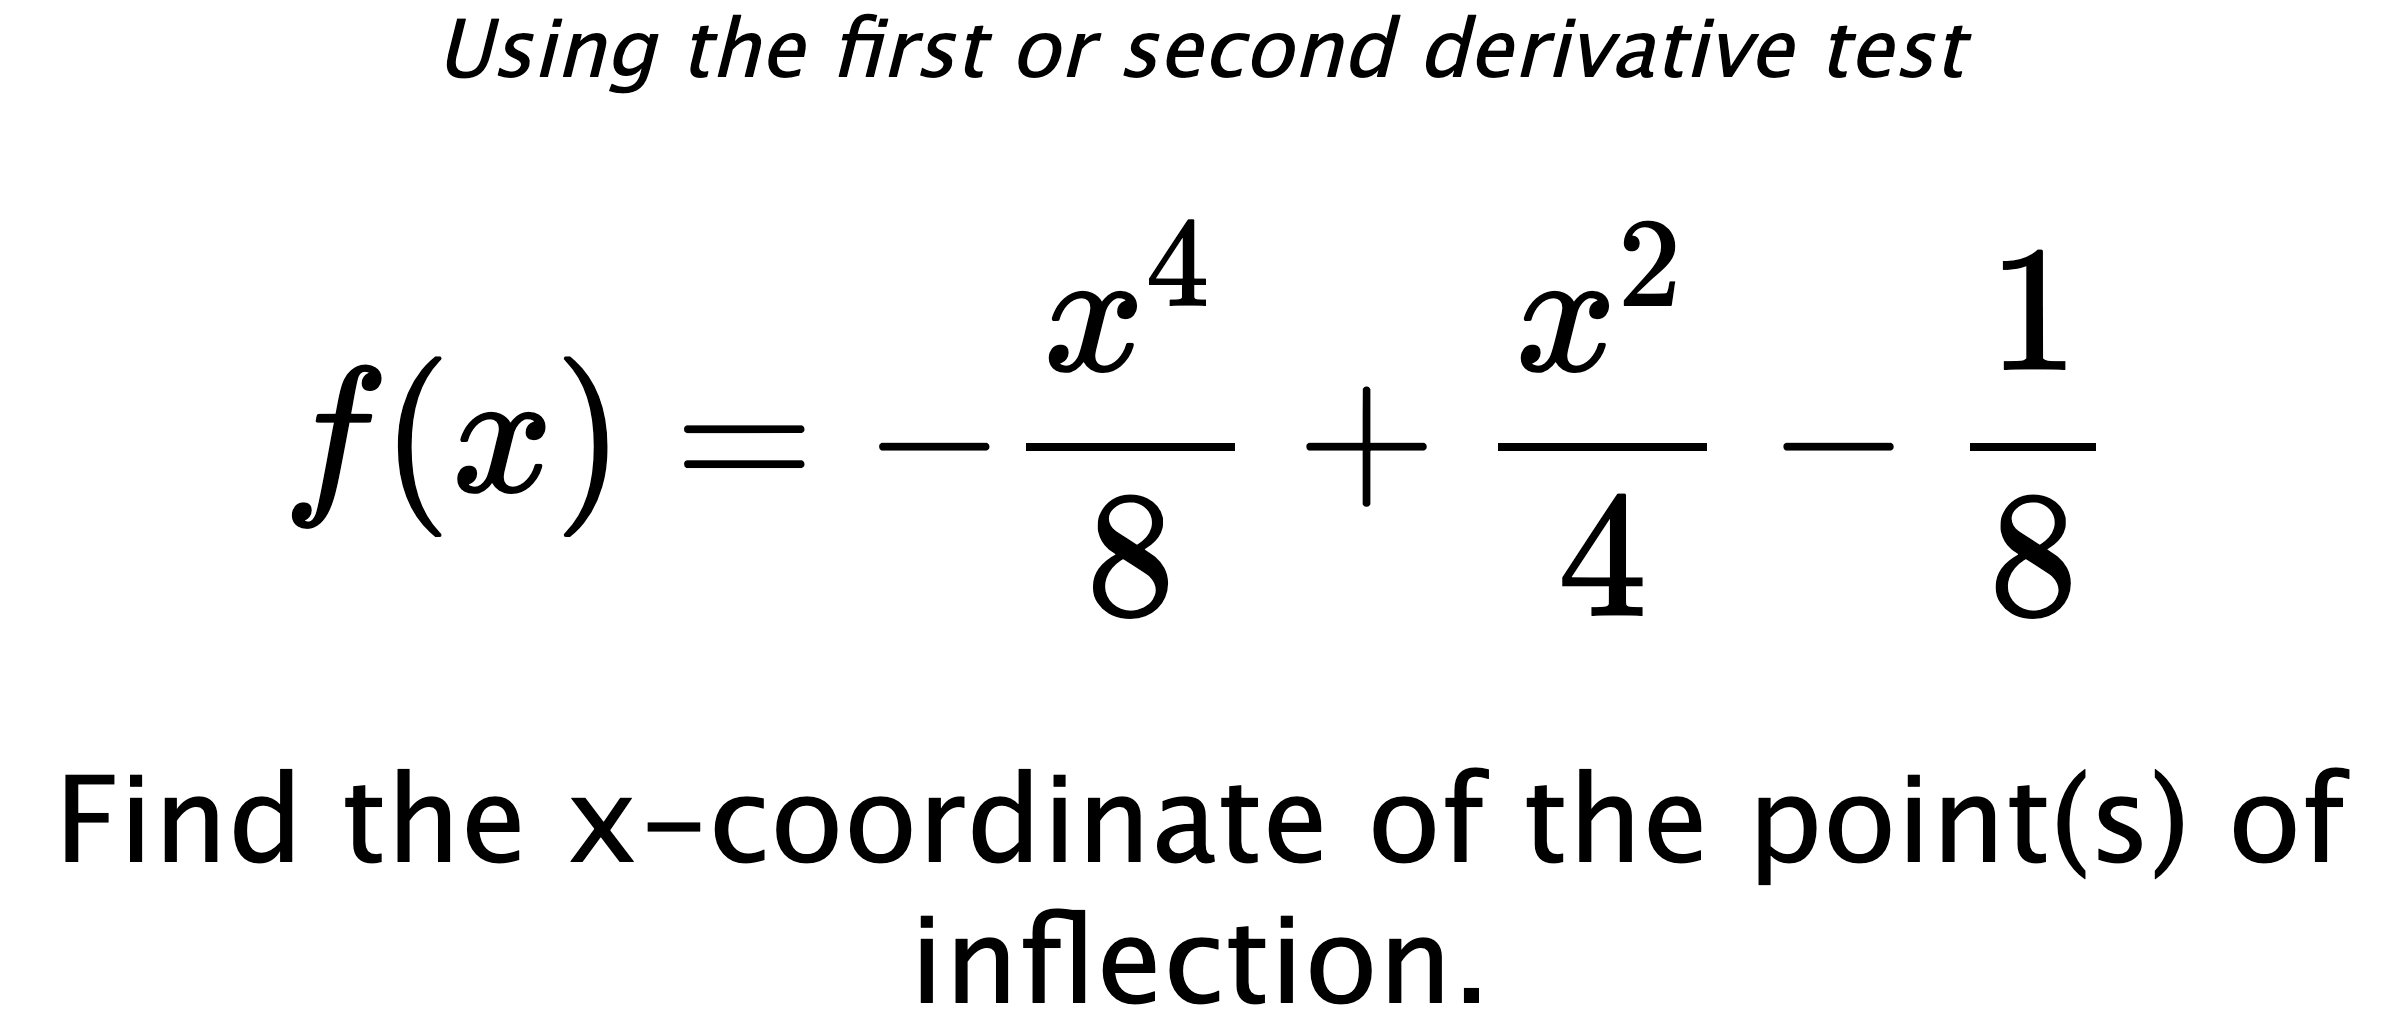 Using the first or second derivative test $$ f(x)=-\frac{x^4}{8}+\frac{x^2}{4}-\frac{1}{8} $$ Find the x-coordinate of the point(s) of inflection.